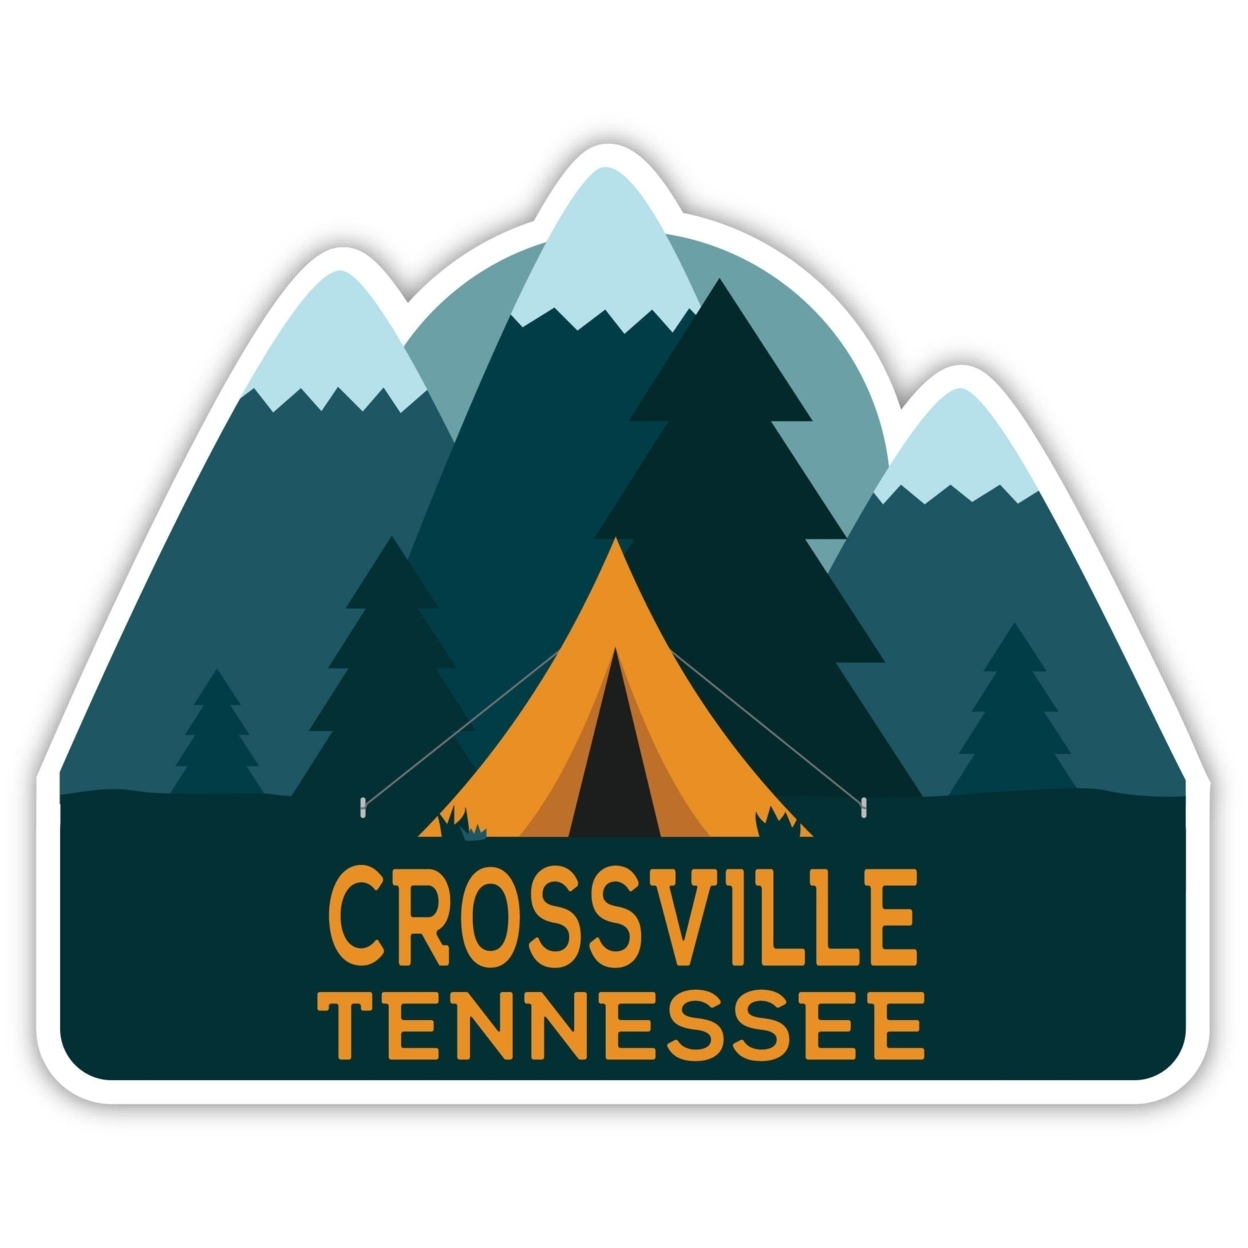 Crossville Tennessee Souvenir Decorative Stickers (Choose Theme And Size) - 4-Pack, 2-Inch, Tent